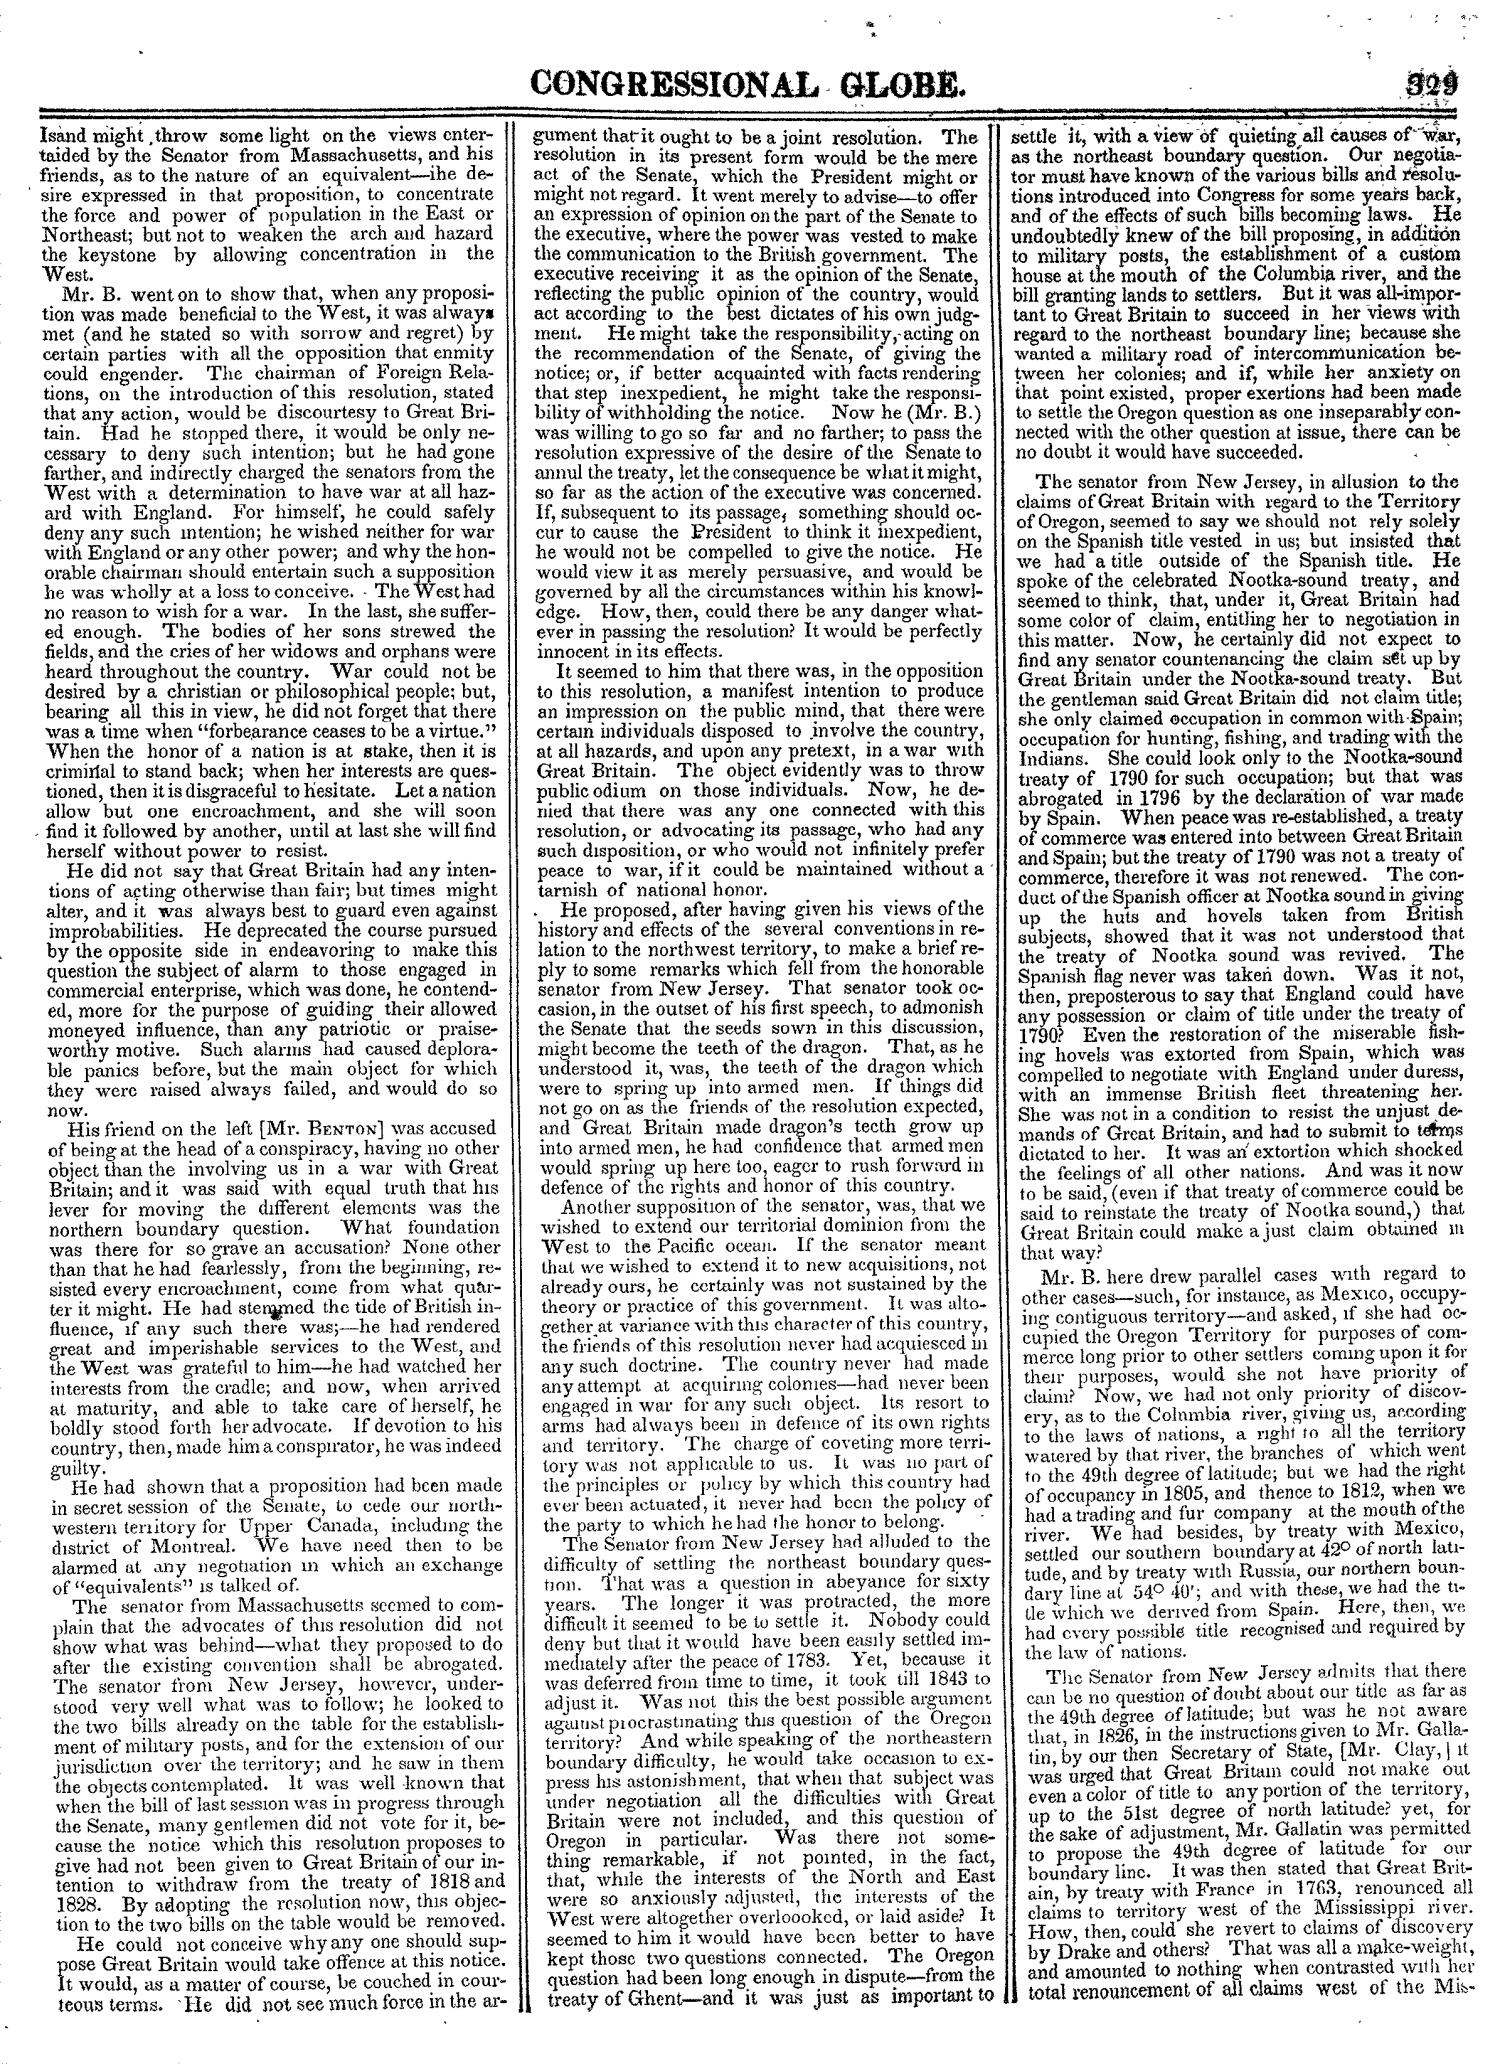 The Congressional Globe, Volume 13, Part 1: Twenty-Eighth Congress, First Session
                                                
                                                    329
                                                